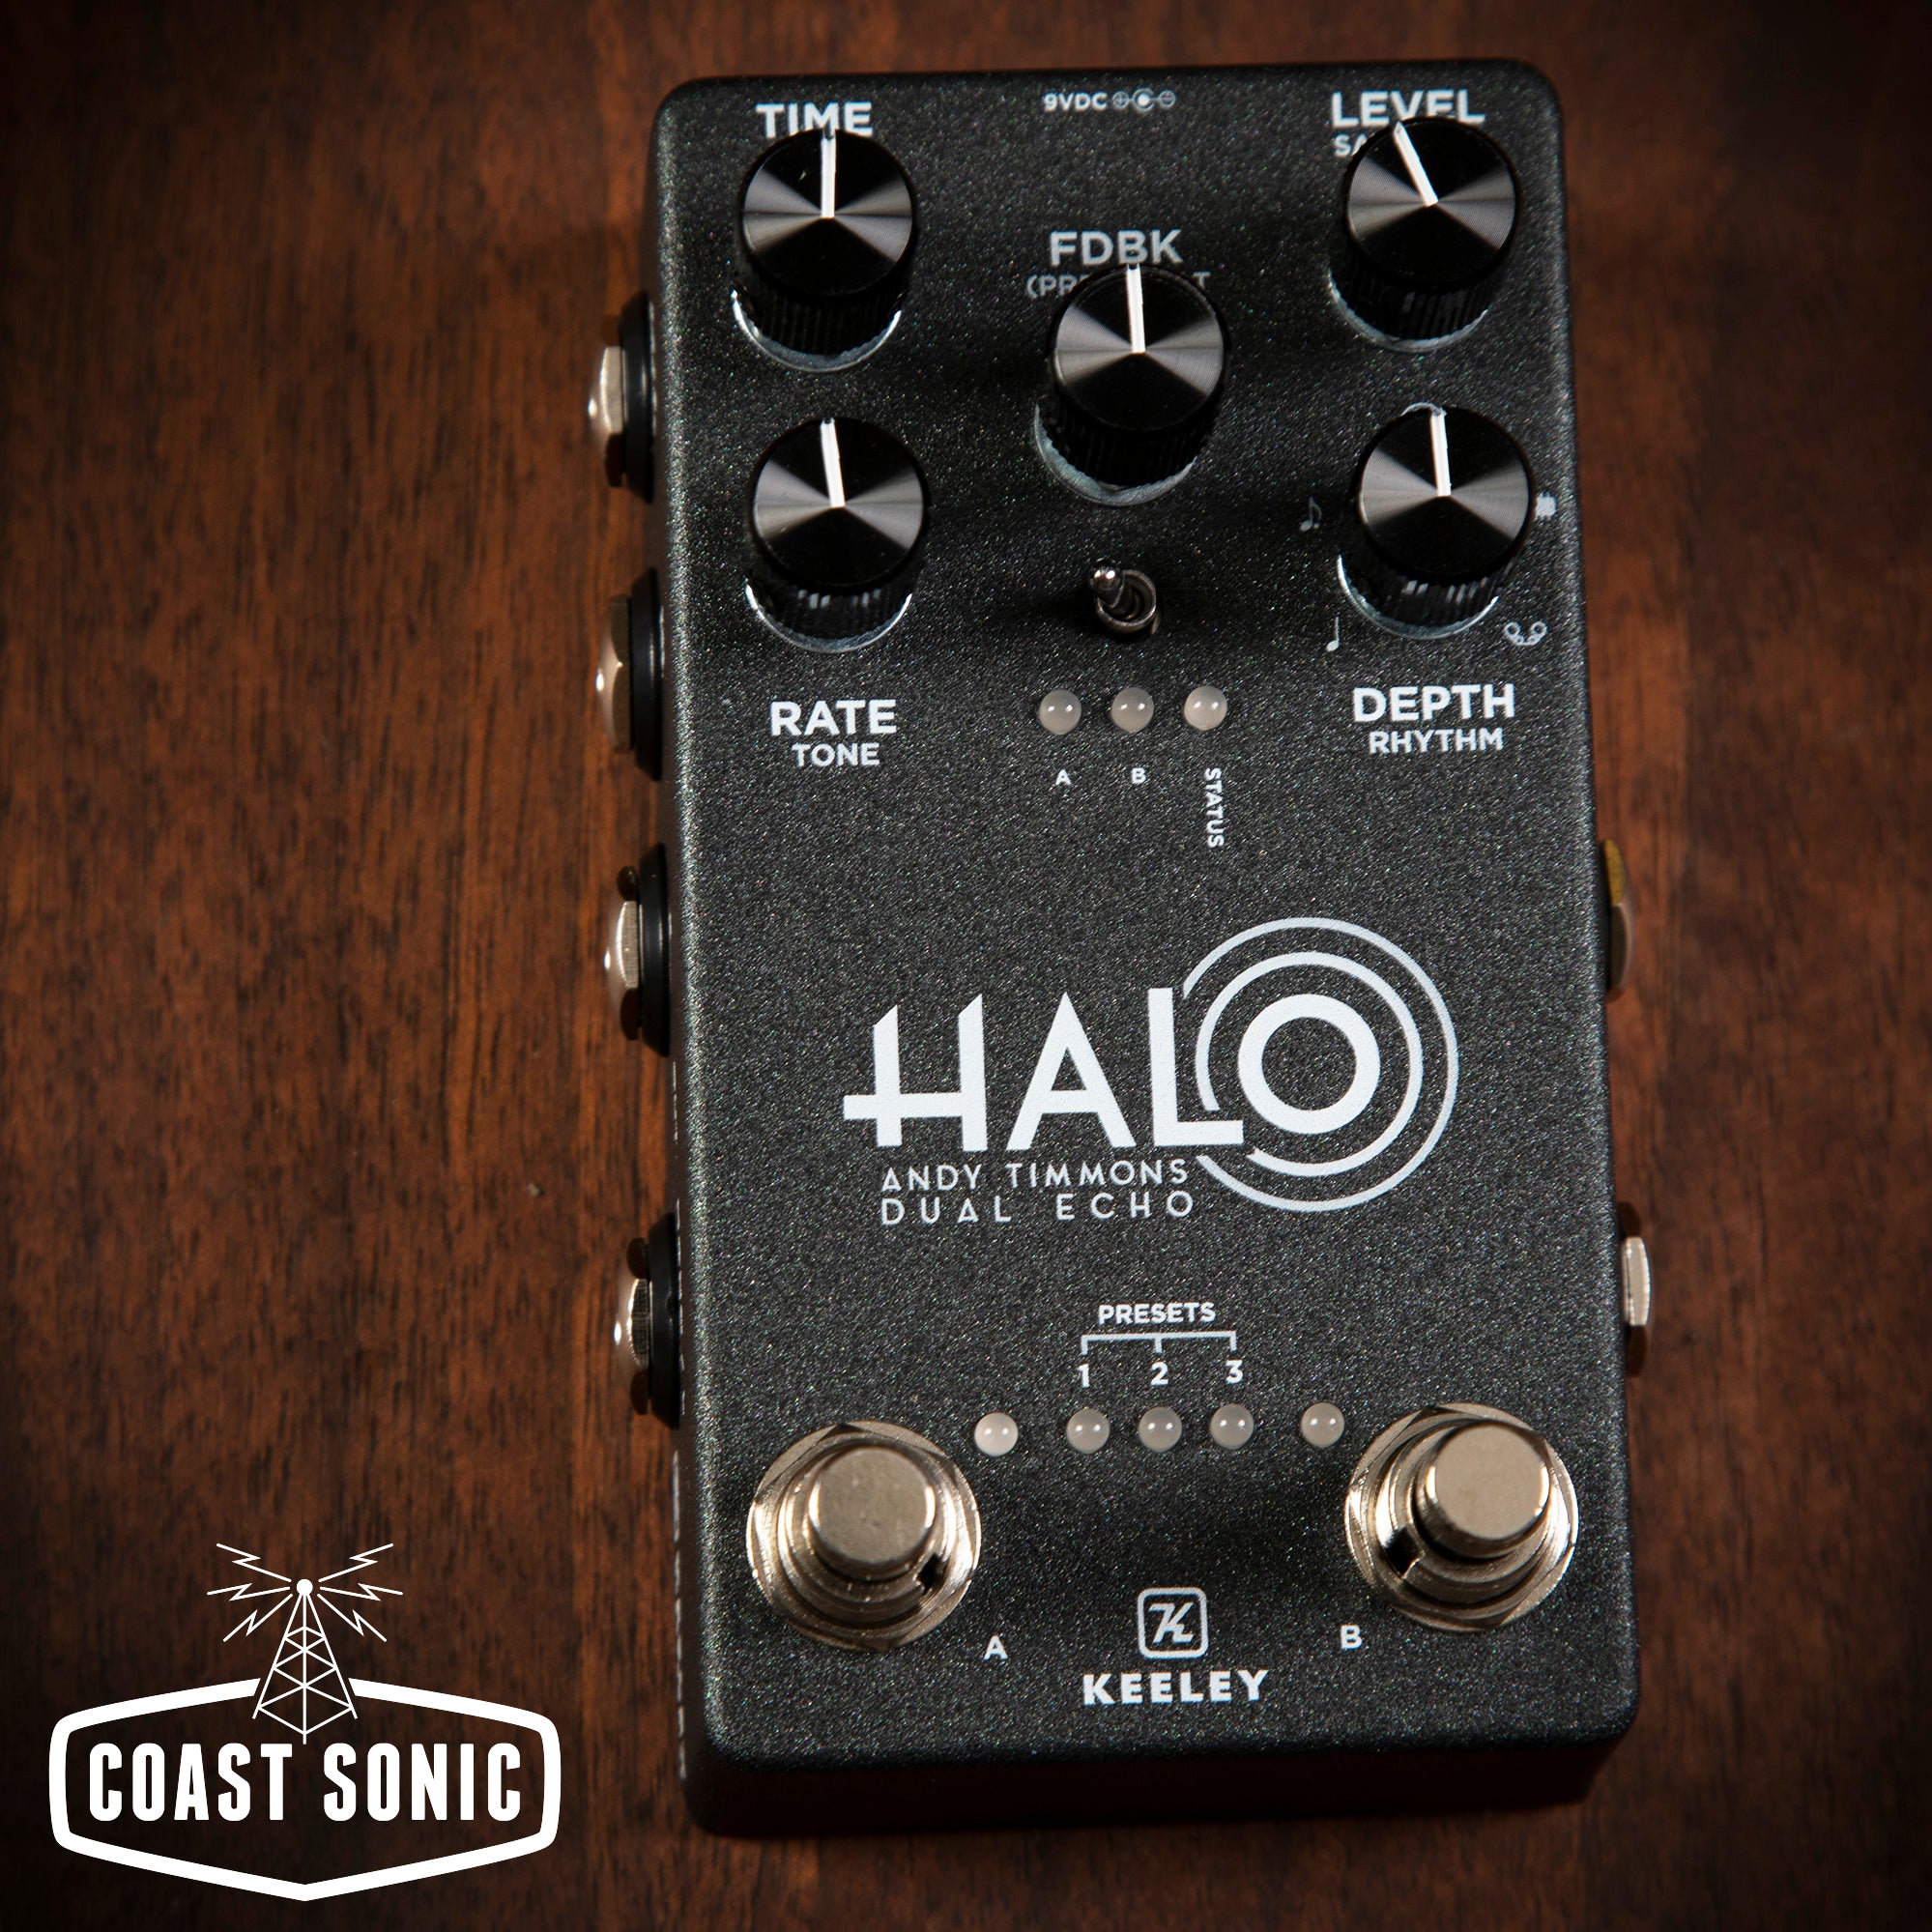 Keeley Electronics HALO Dual Echo Delay Andy Timmons